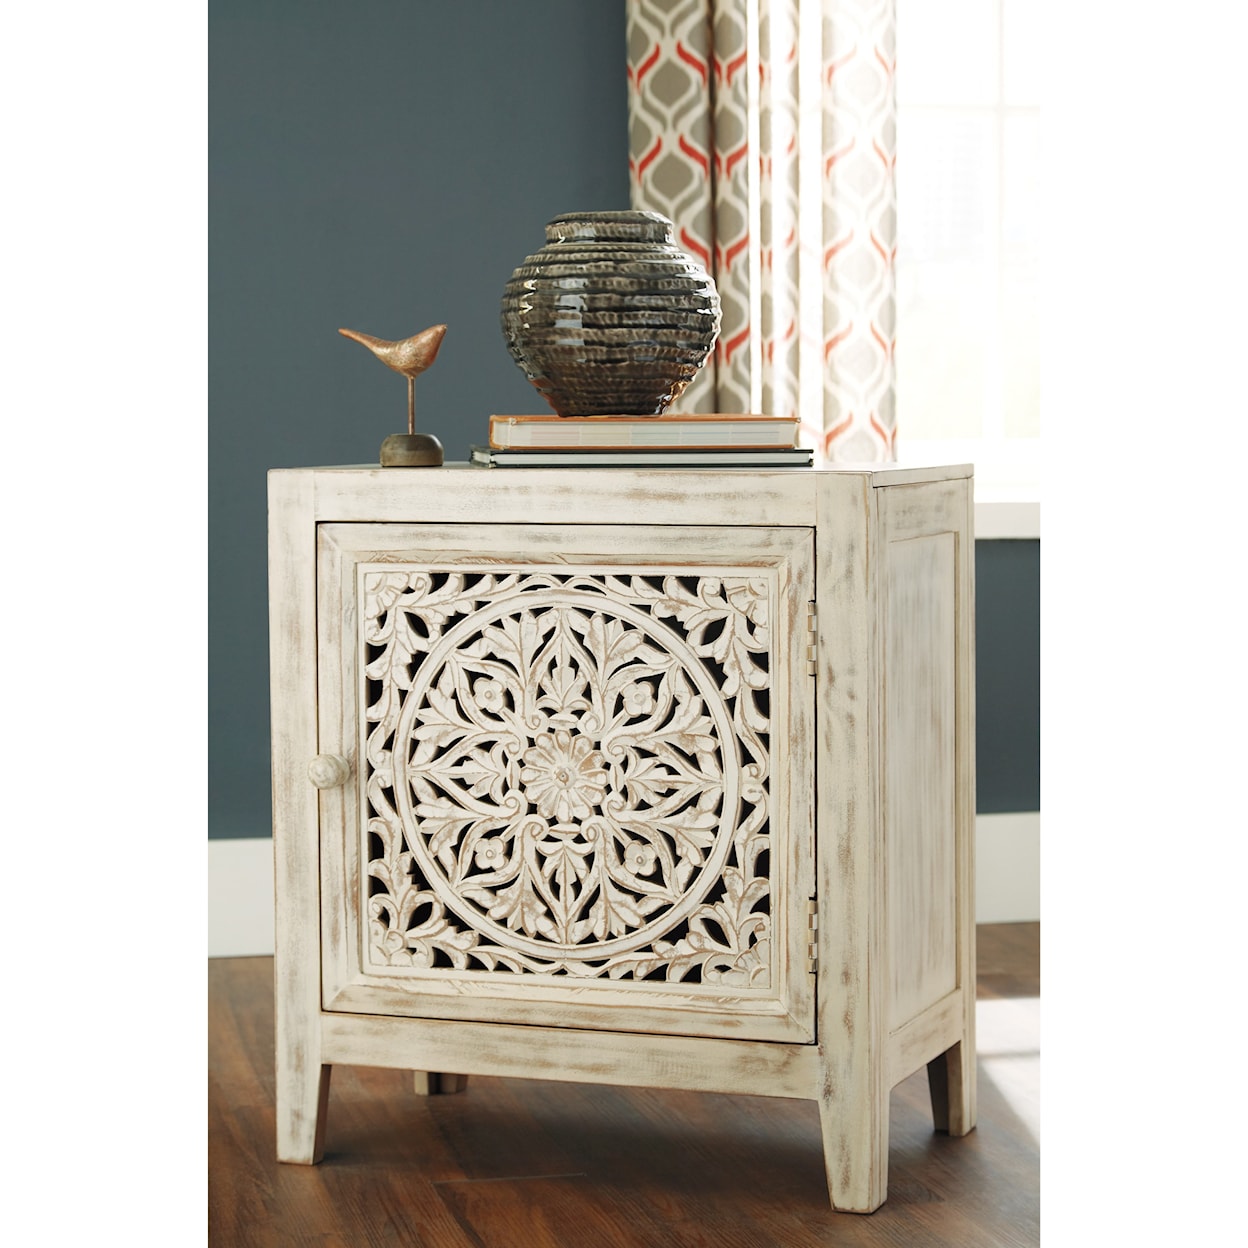 Belfort Select Fossil Ridge Accent Cabinet